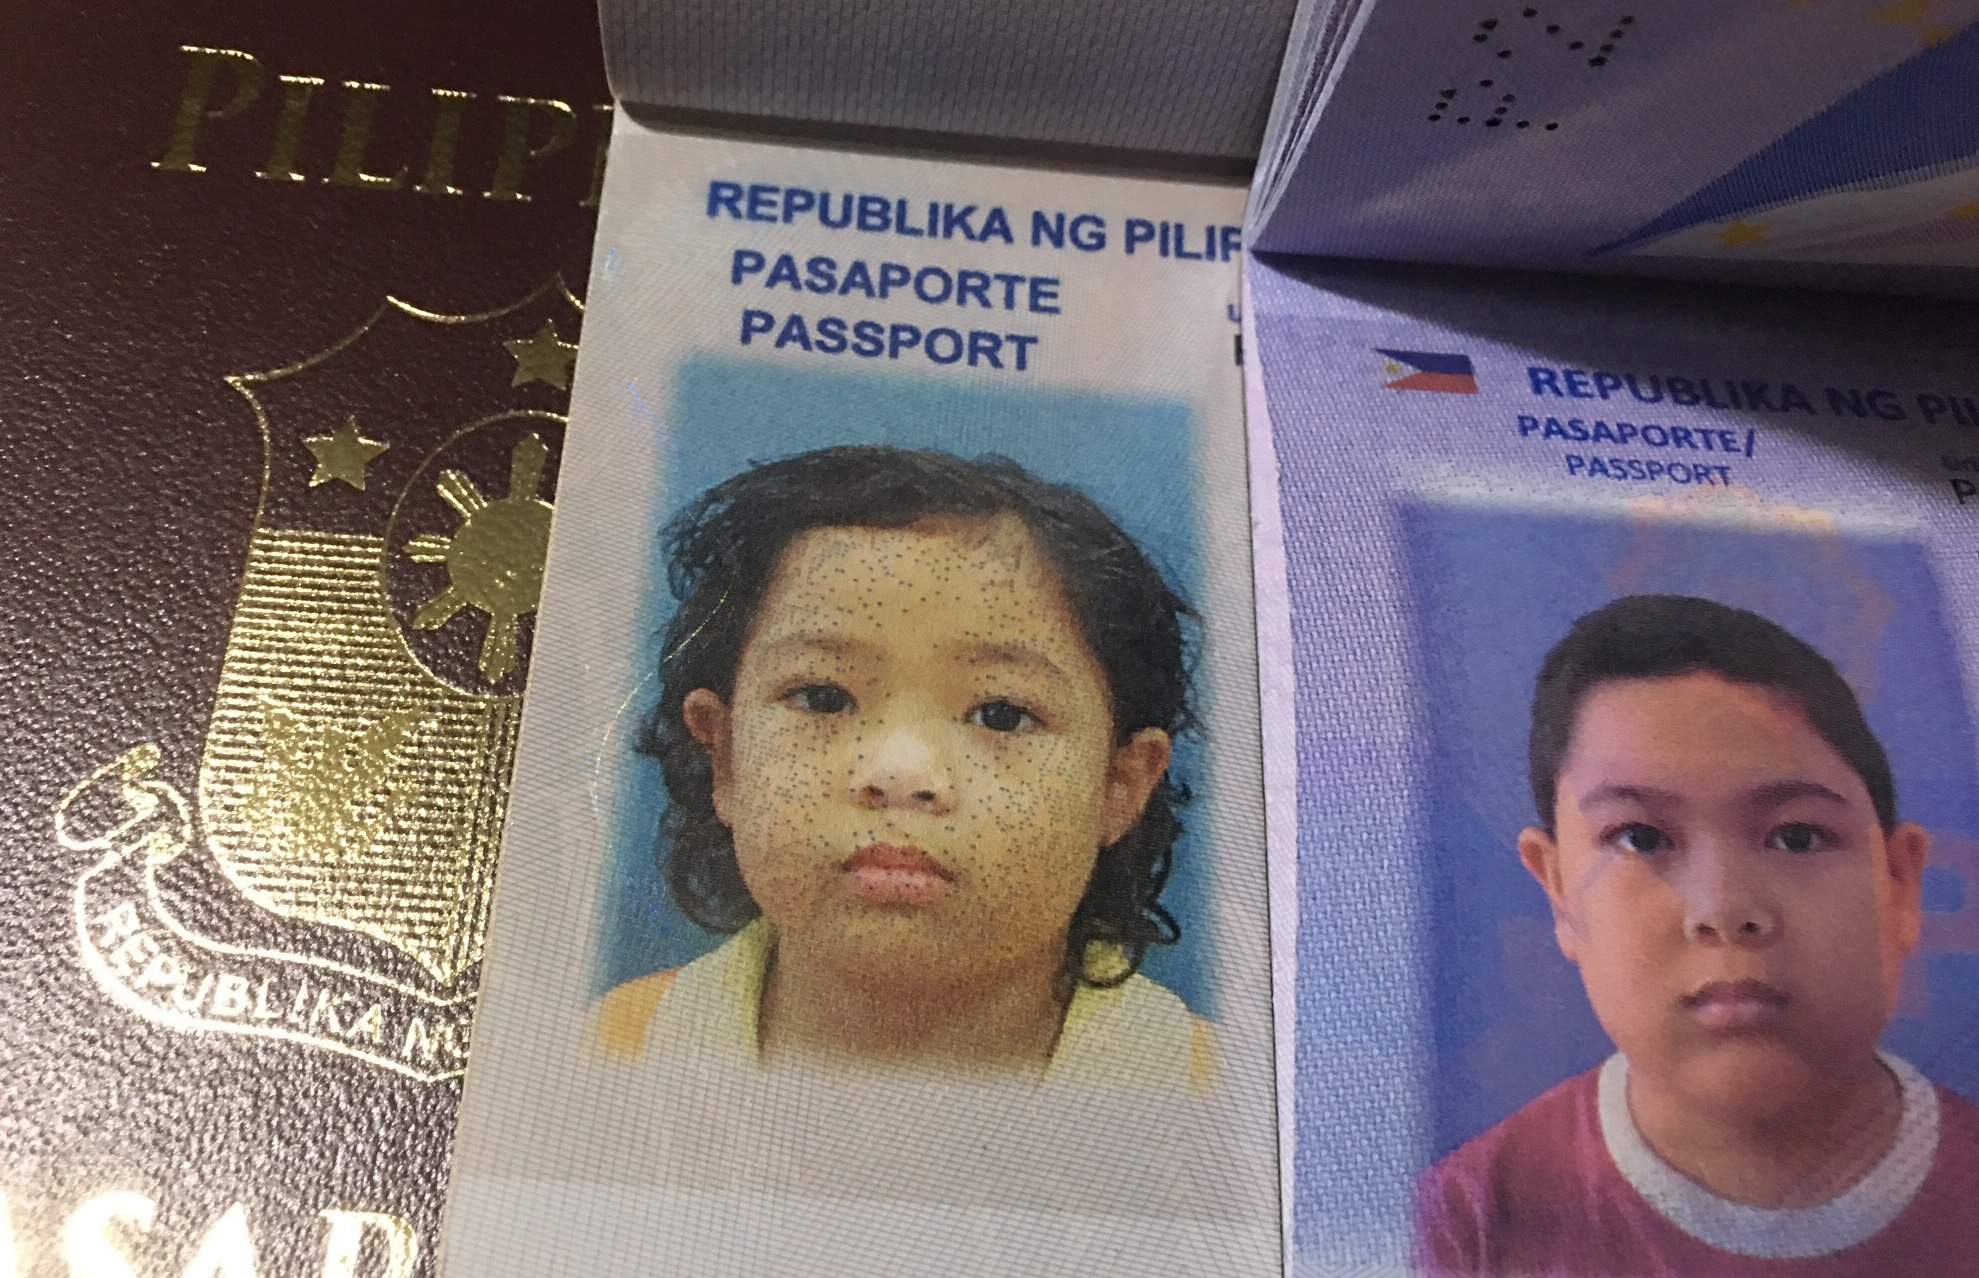 Passport Renewal For Minors Philippines How To Renew Your 